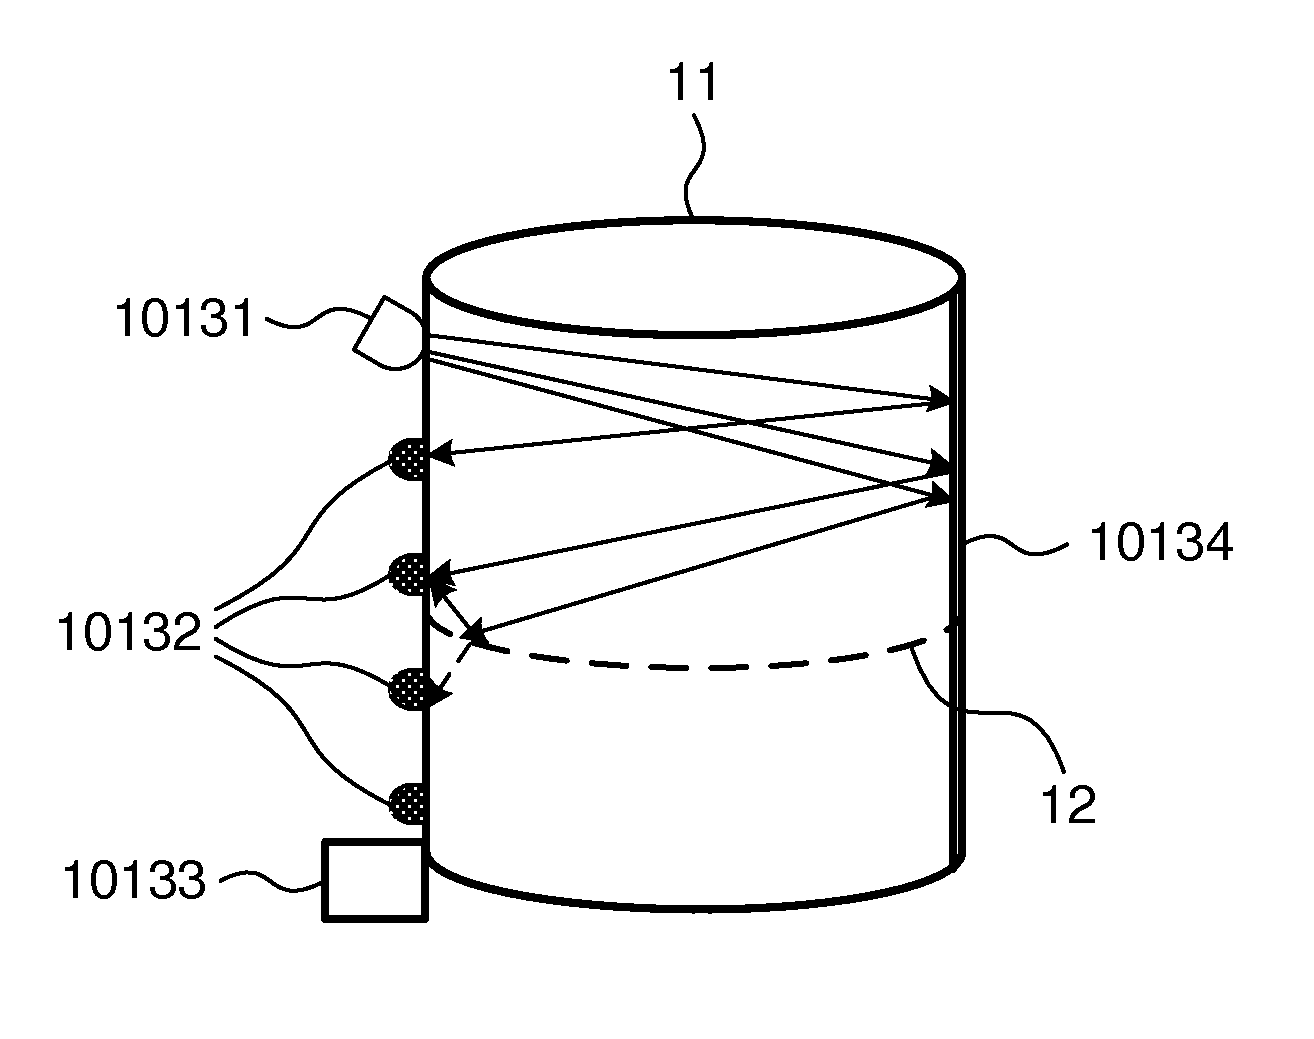 Apparatuses and methods for managing liquid volume in a container